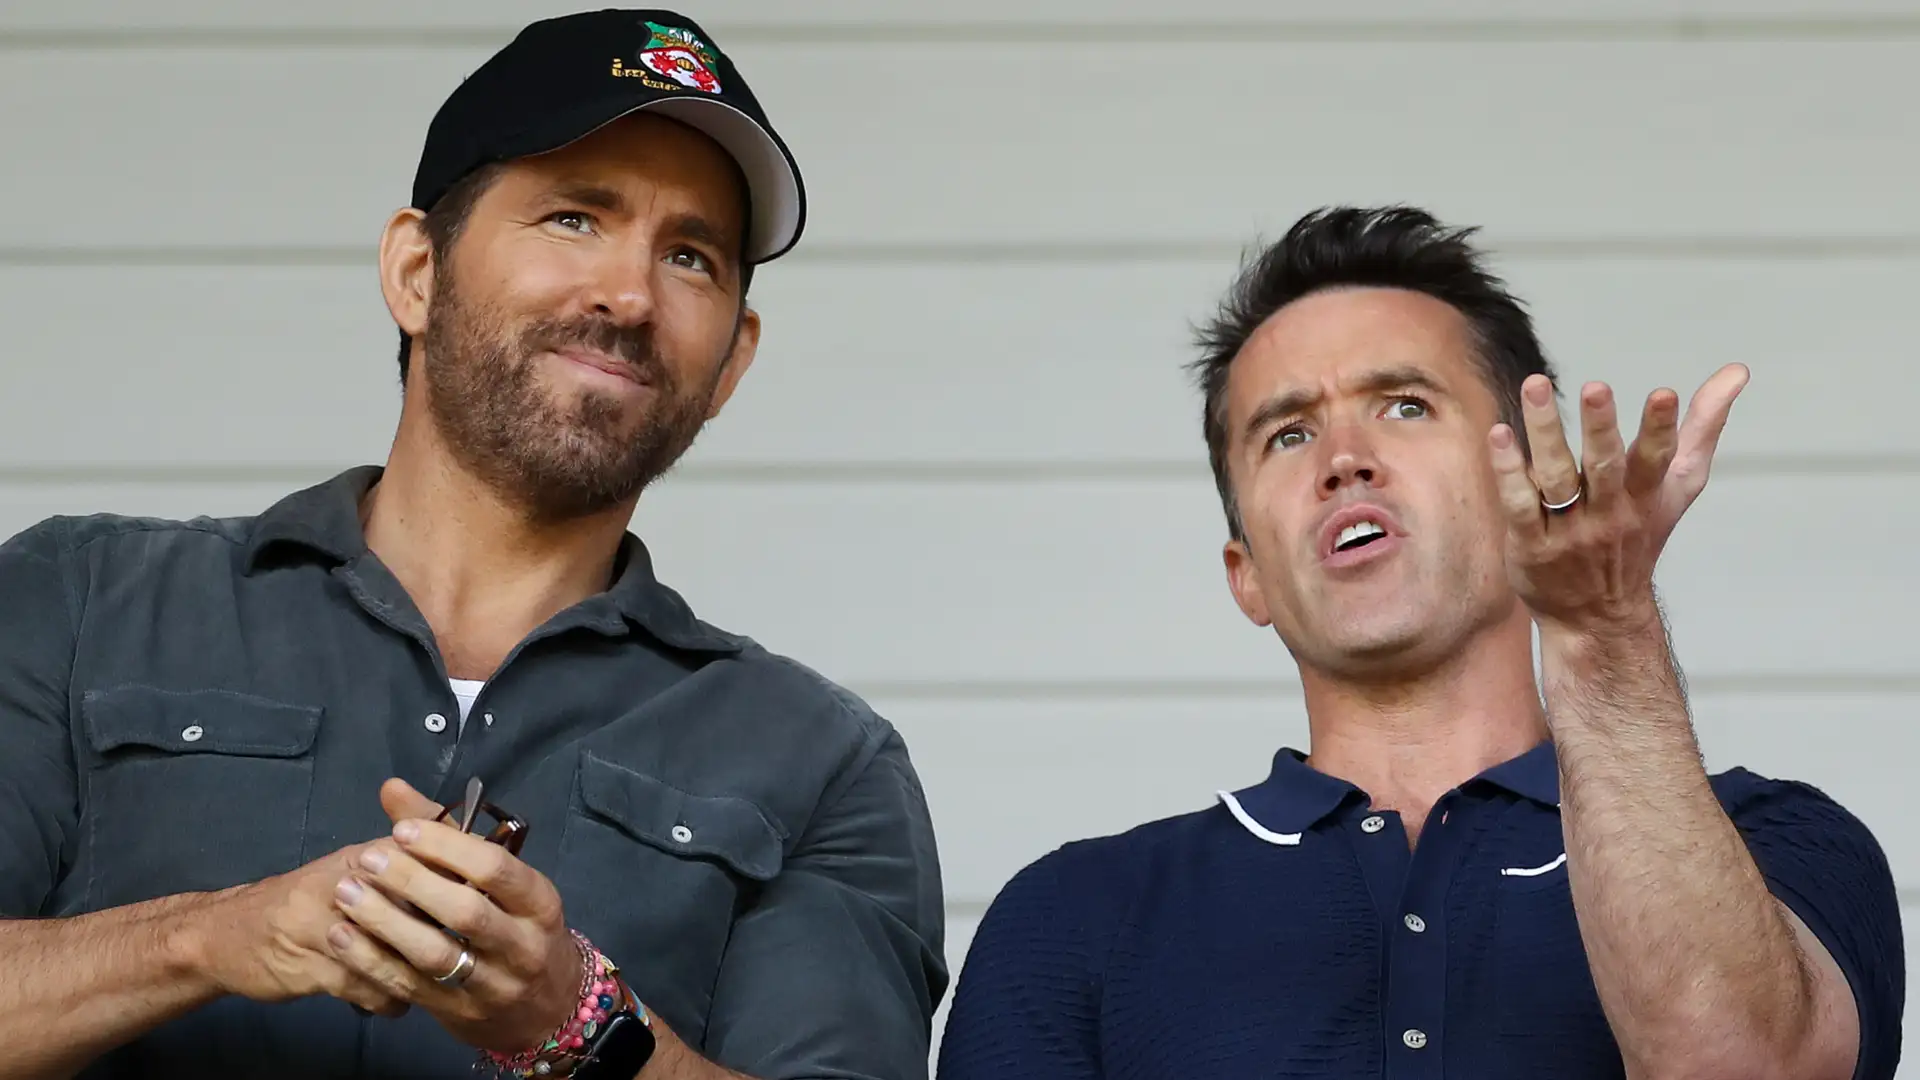 Explained: Why Rob McElhenney asked Ryan Reynolds to co-own Wrexham – with 2:30am phone call putting surprising Hollywood partnership in place